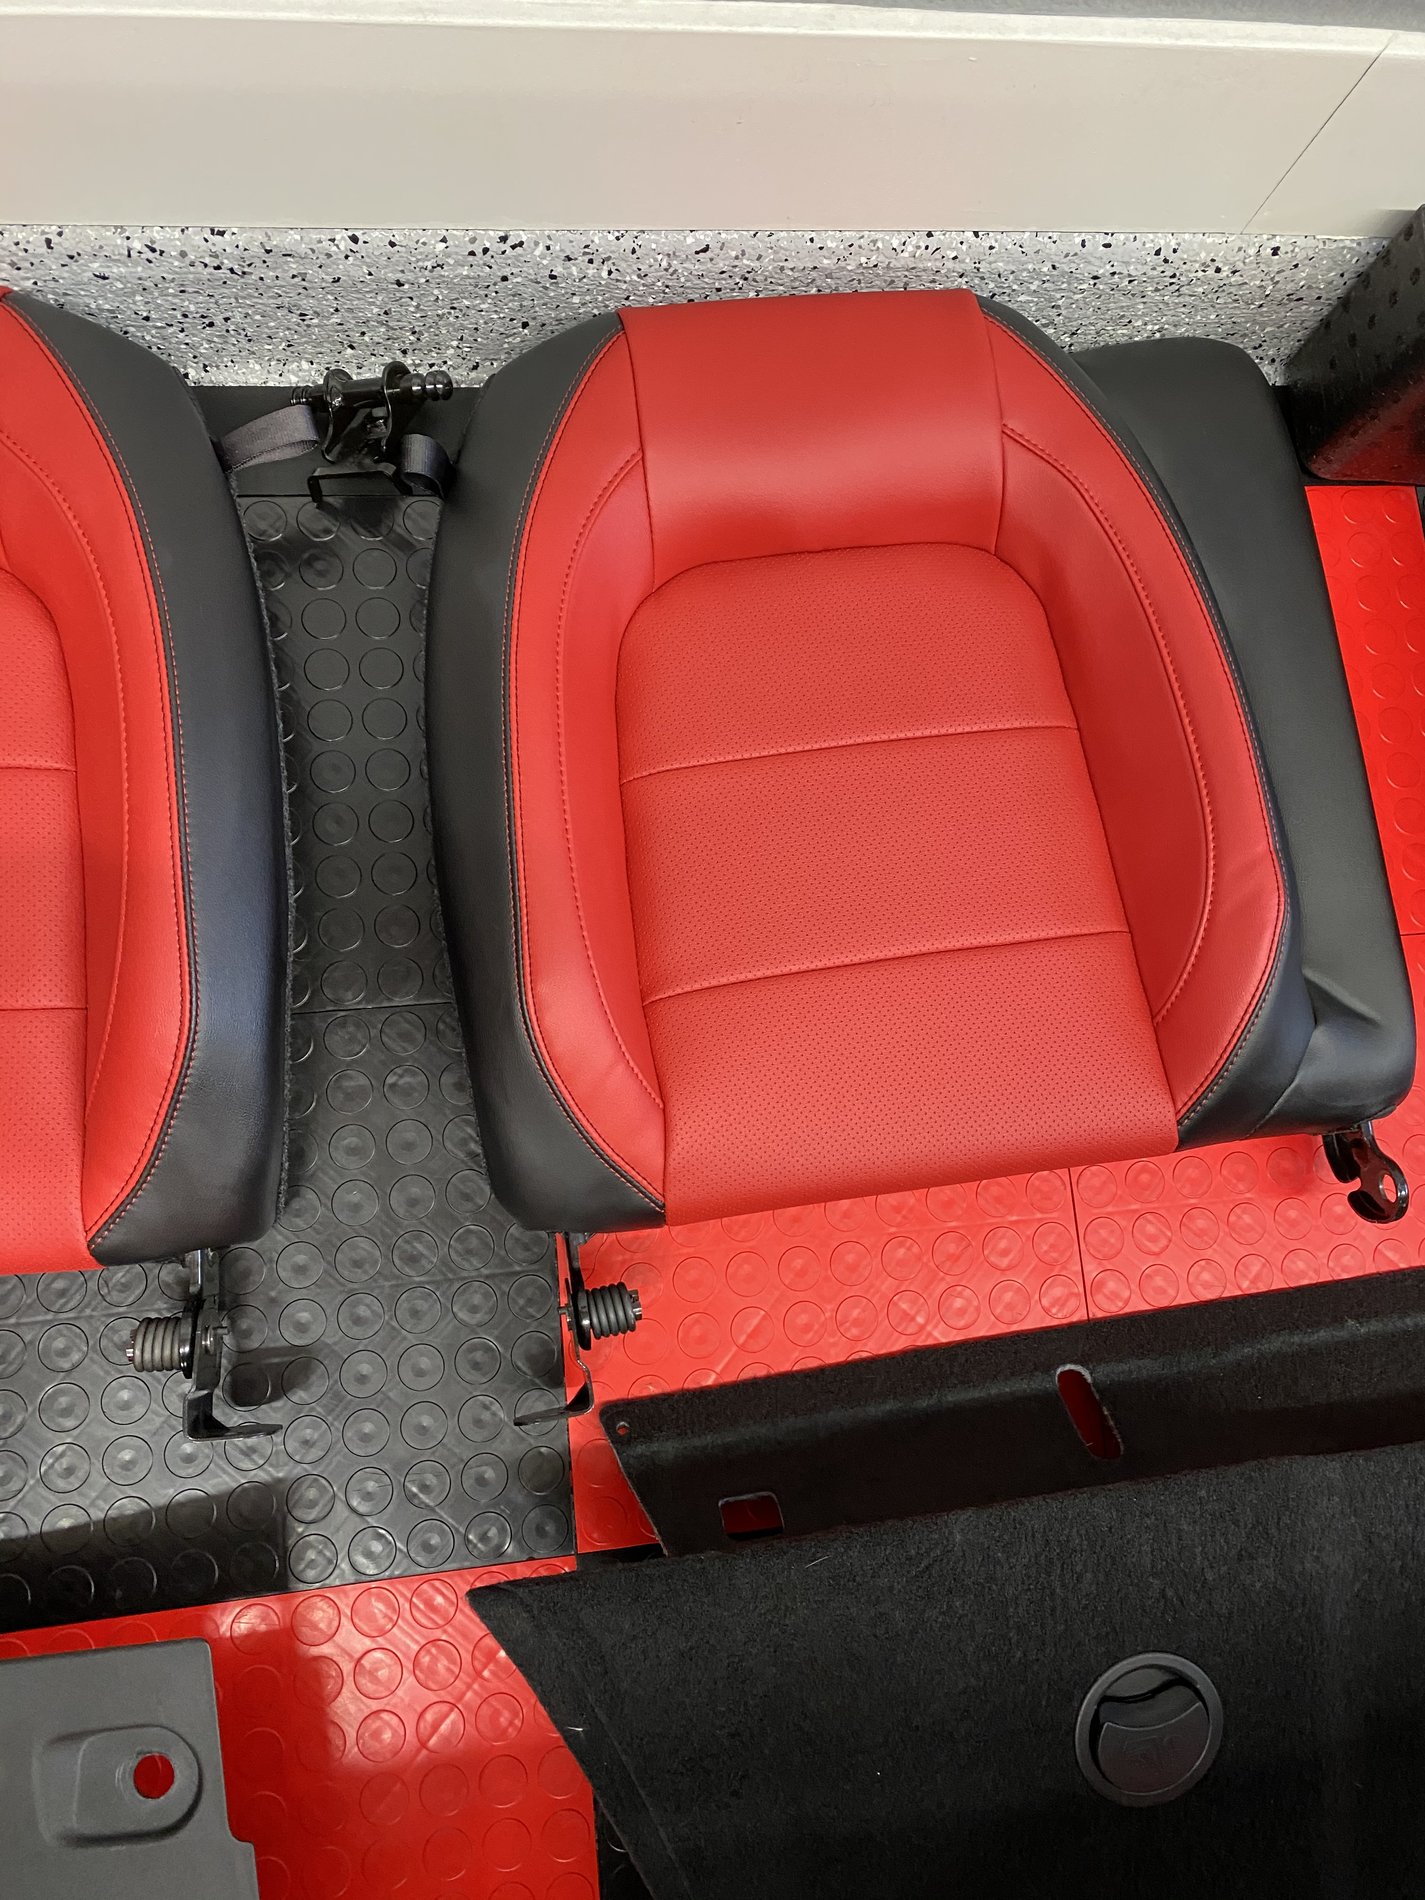 Nevada - 2018 Mustang GT showstopper Red Seats front and back. Heated